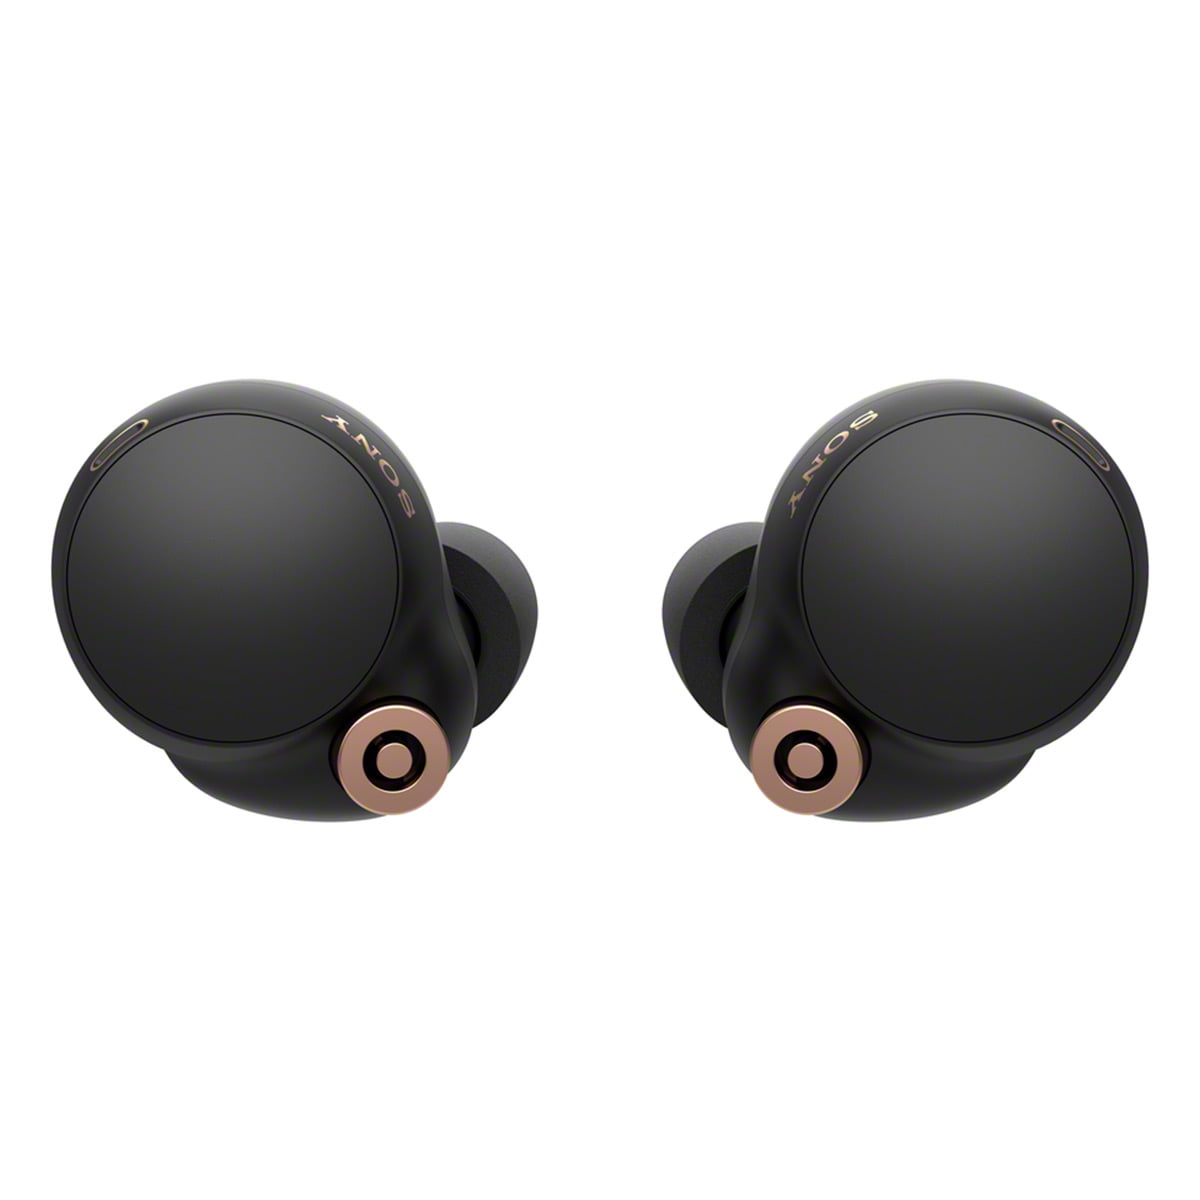 Sony True Wireless Earbuds with Charging Case, Black 